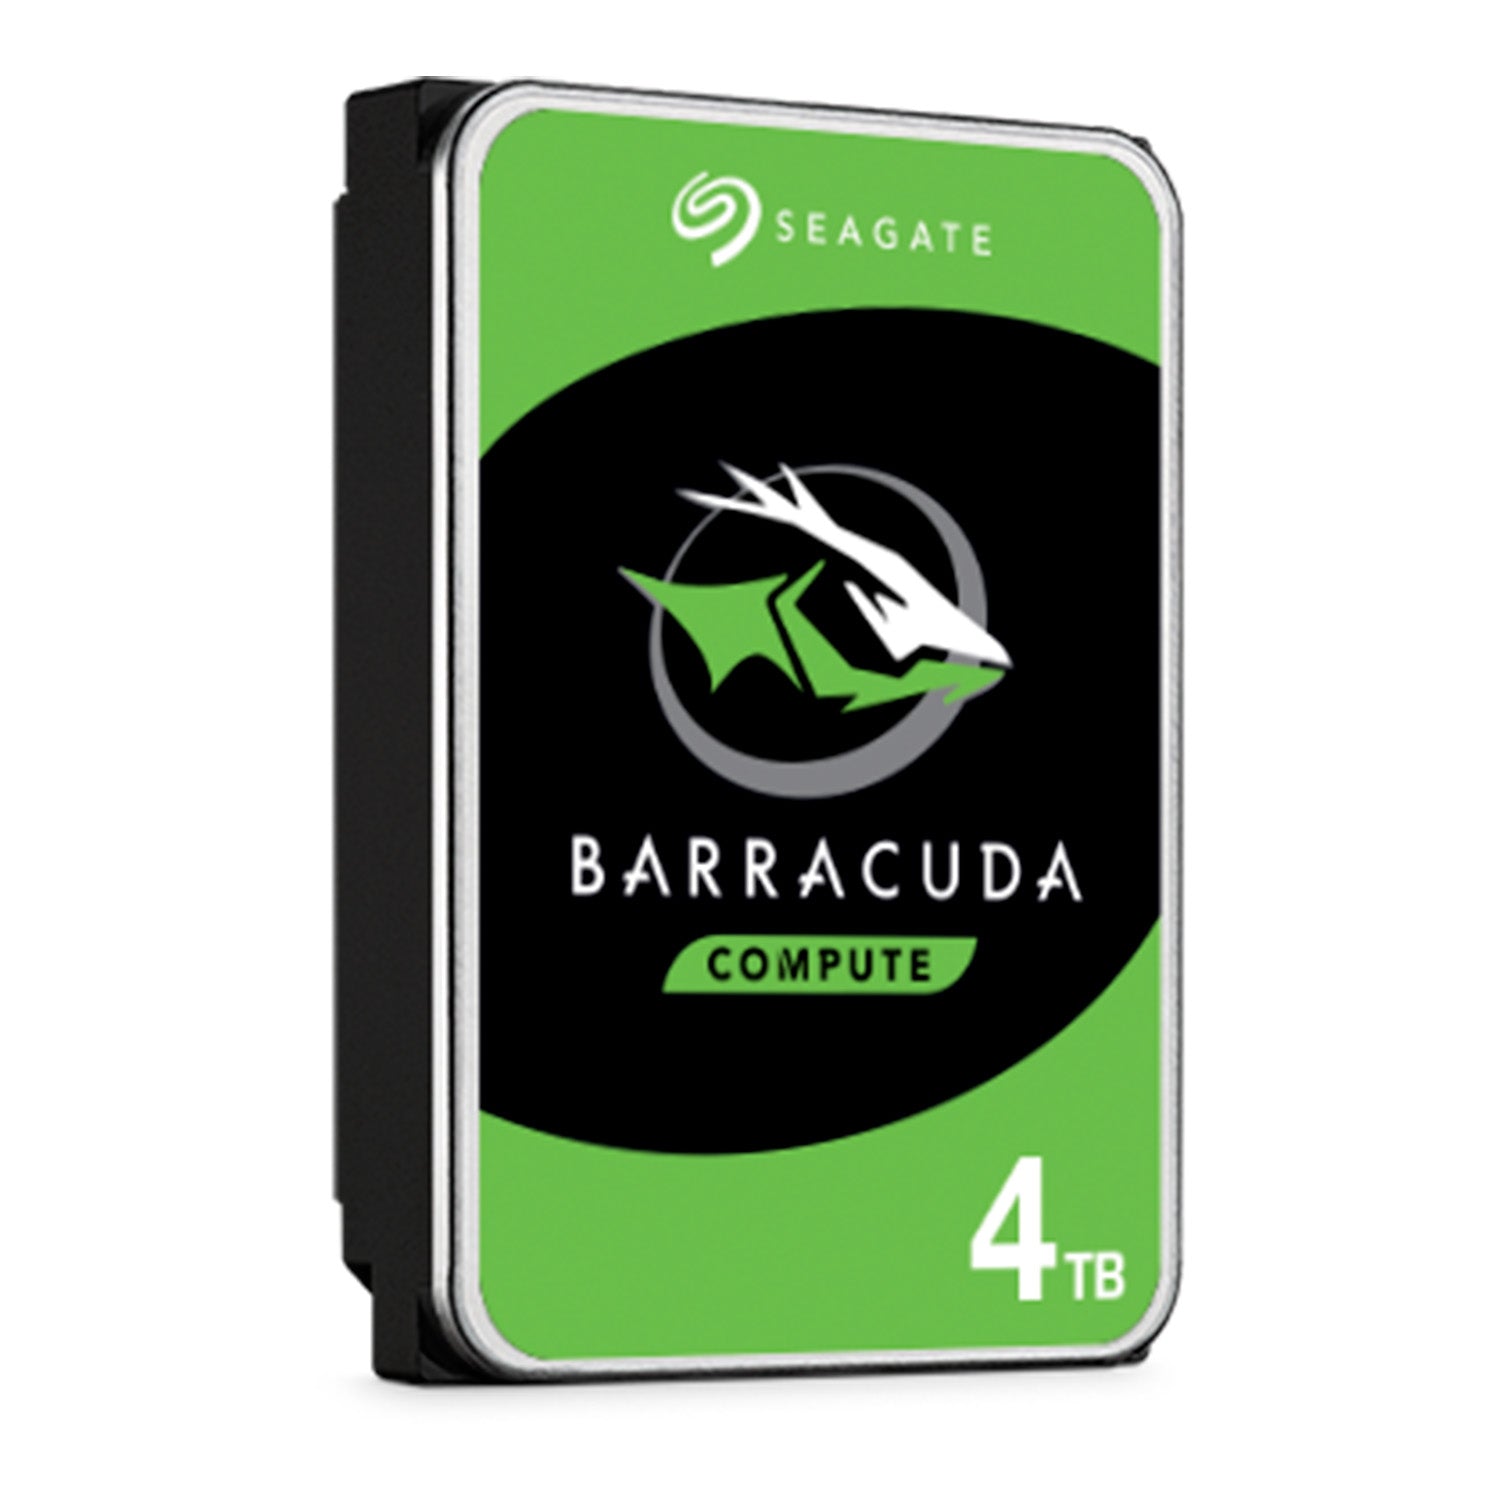 Seagate Barracuda 4TB Internal Hard Drive HDD (3.5 Inch) SATA 6 Gb/s 5400 RPM 256 MB Cache - High performance PC or Laptop Memory and Storage for IT Pros, Creators, Everyday Users (ST4000DM004)